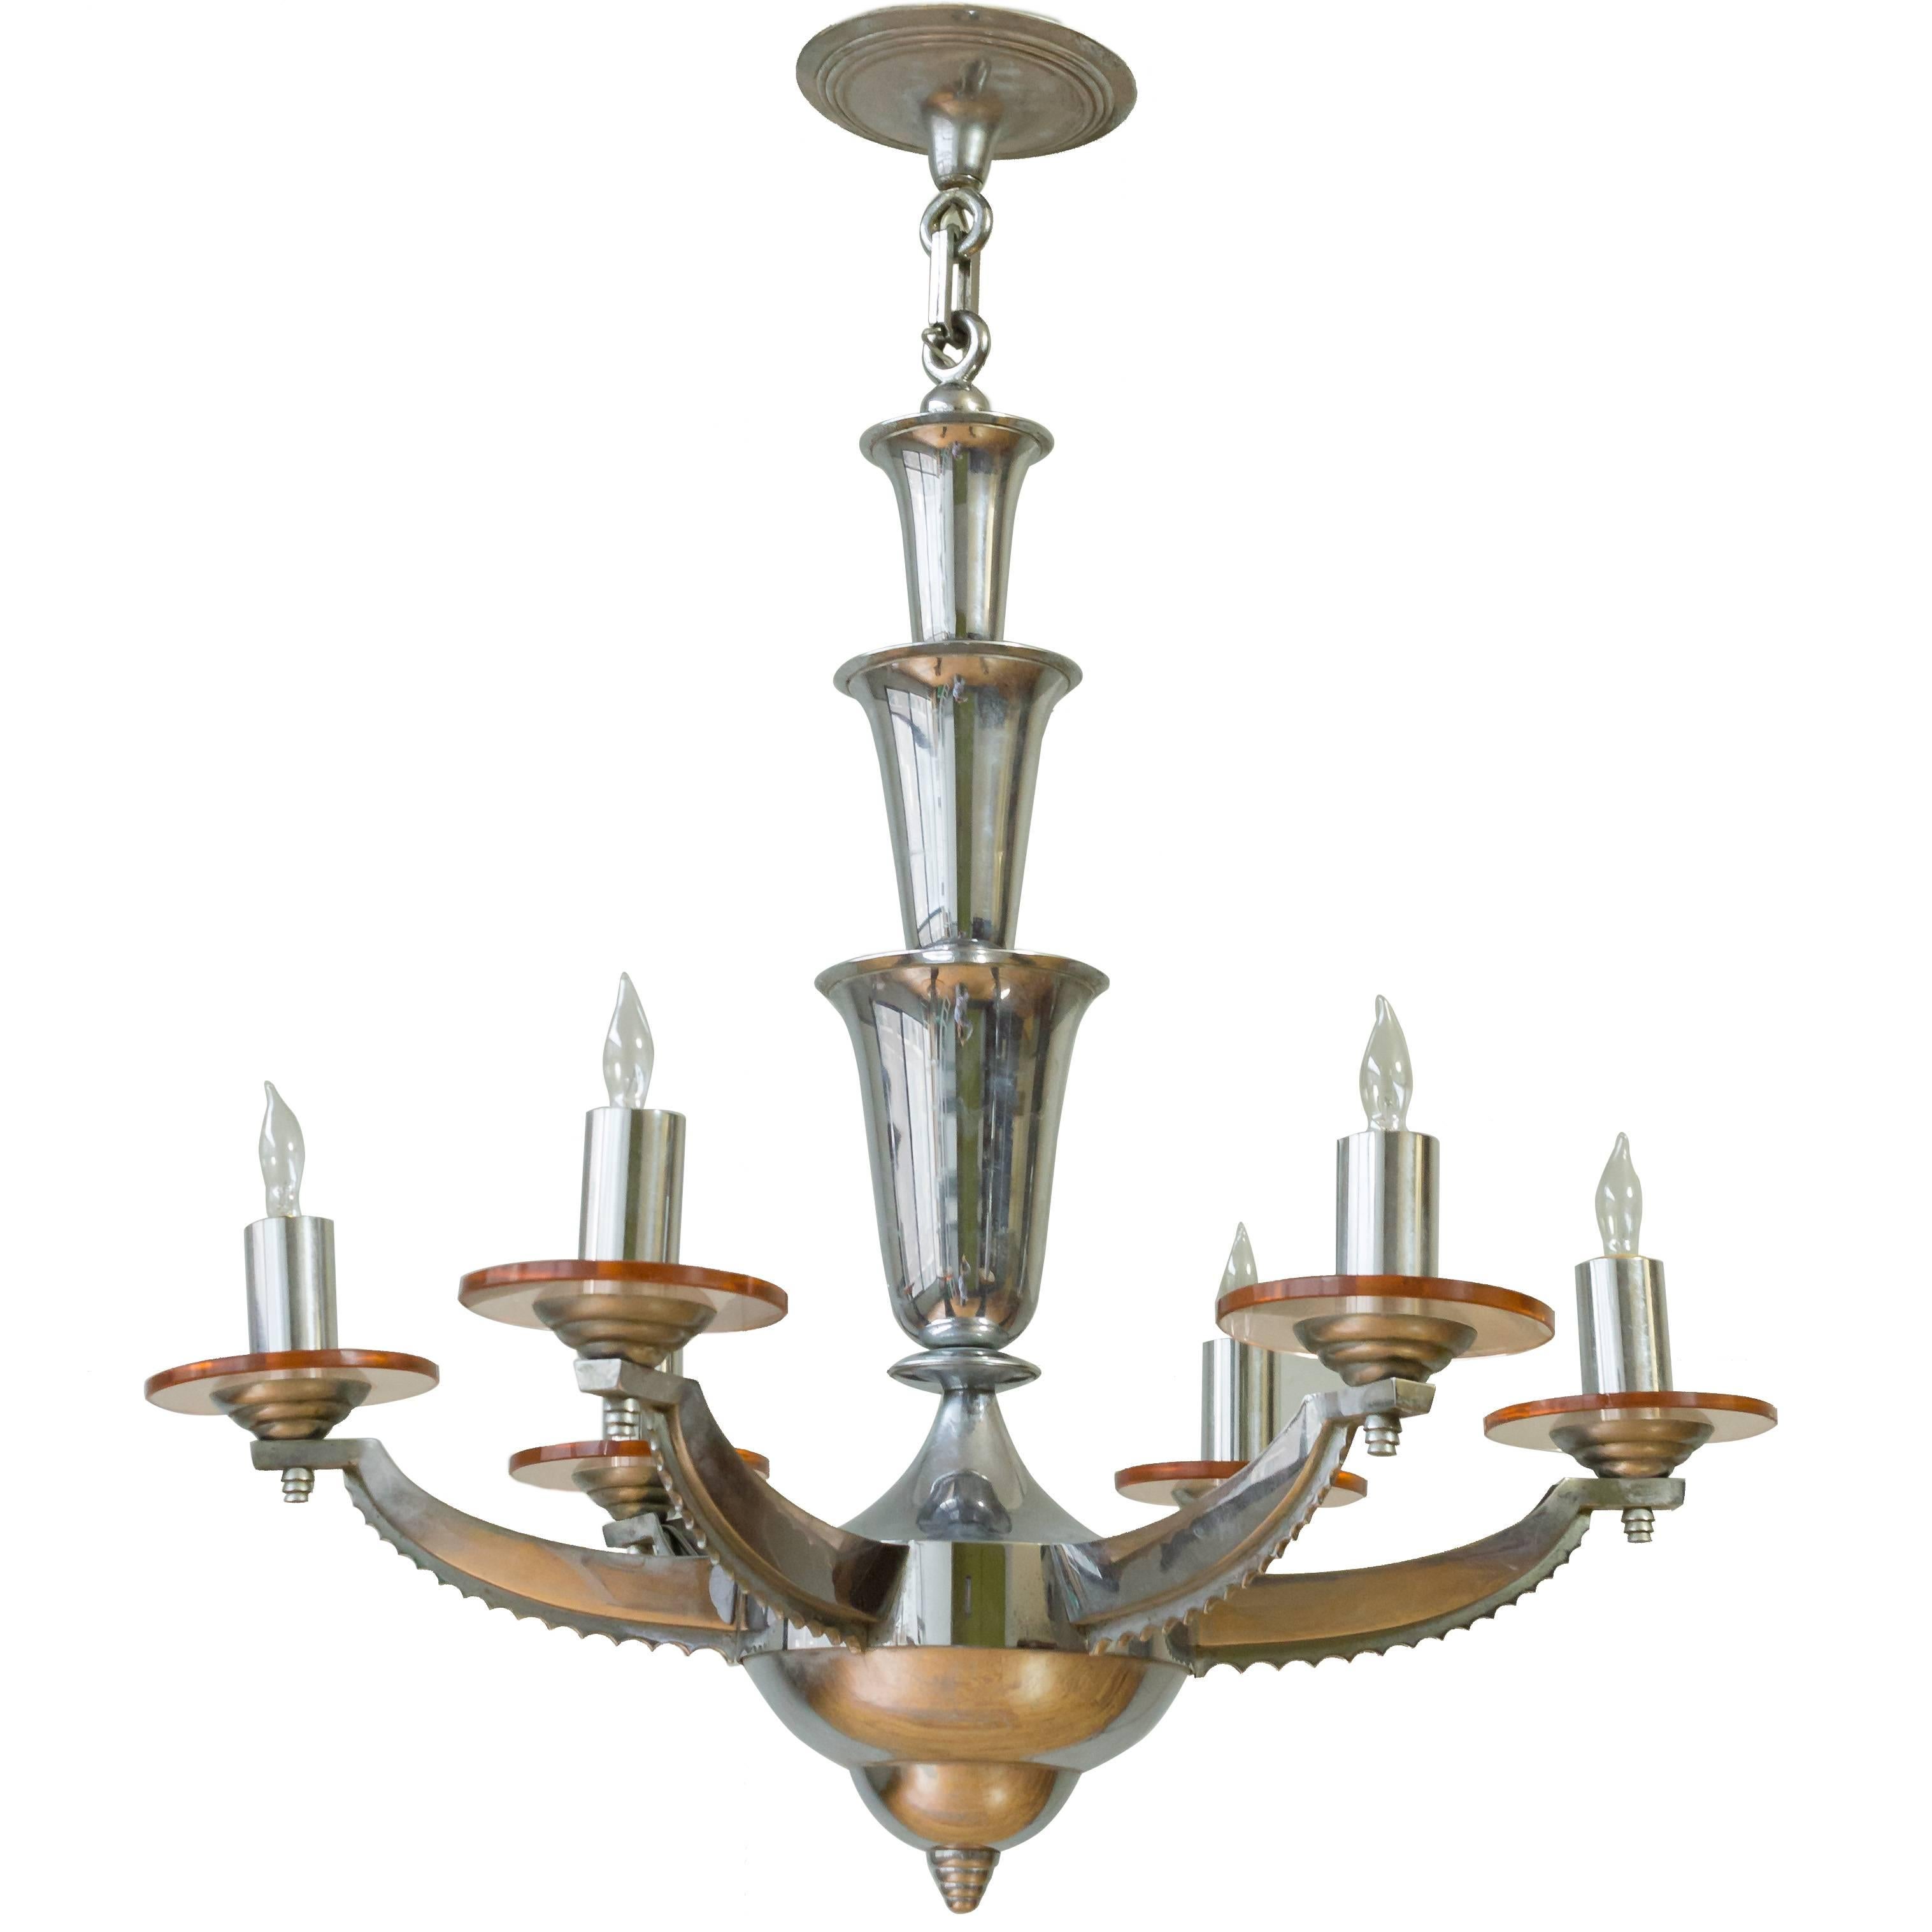 1930s Chrome and Glass Art Deco Chandelier by Petitot